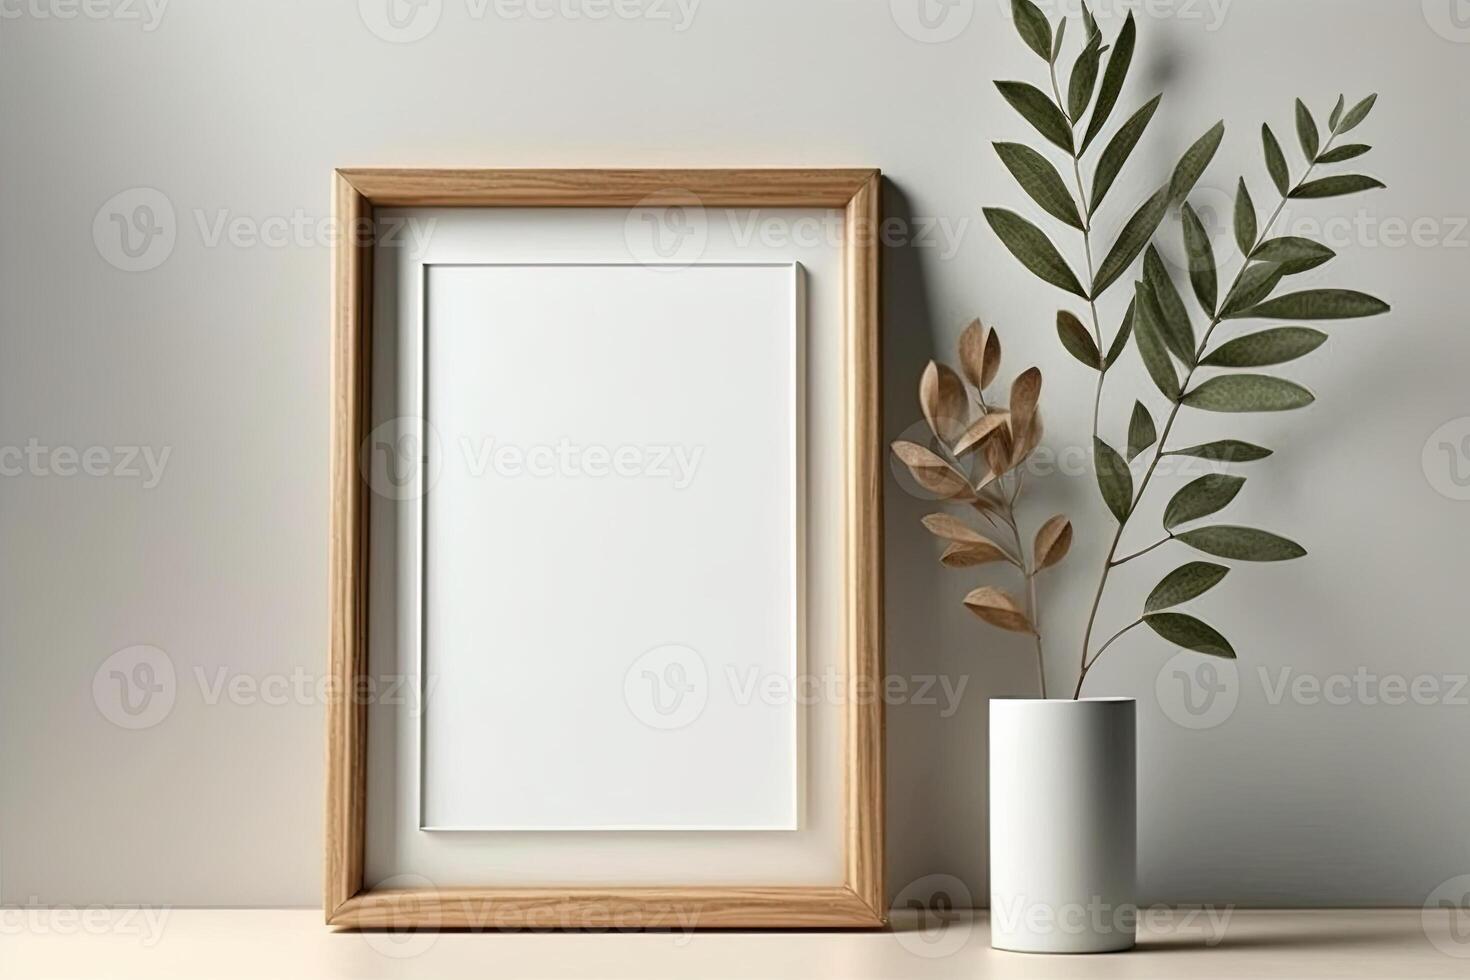 Blank picture frame mockup on wall in modern interior. Artwork template mock up in interior design. Wooden Picture Frame Mockup on White Wall Minimalist - photo